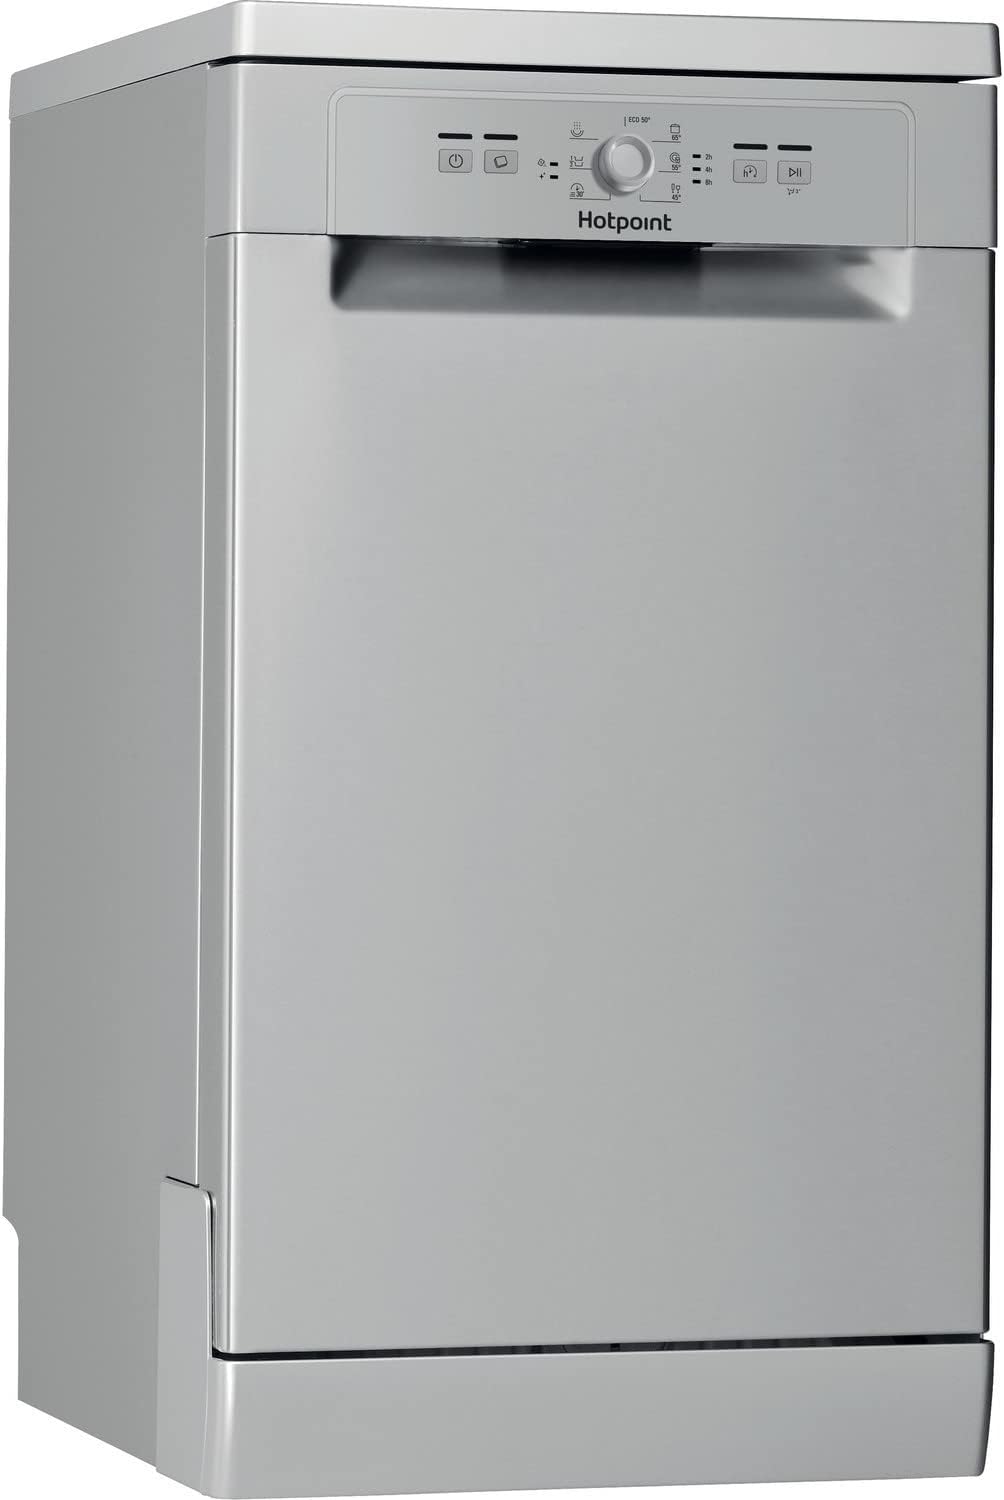 Hotpoint Dishwasher Review